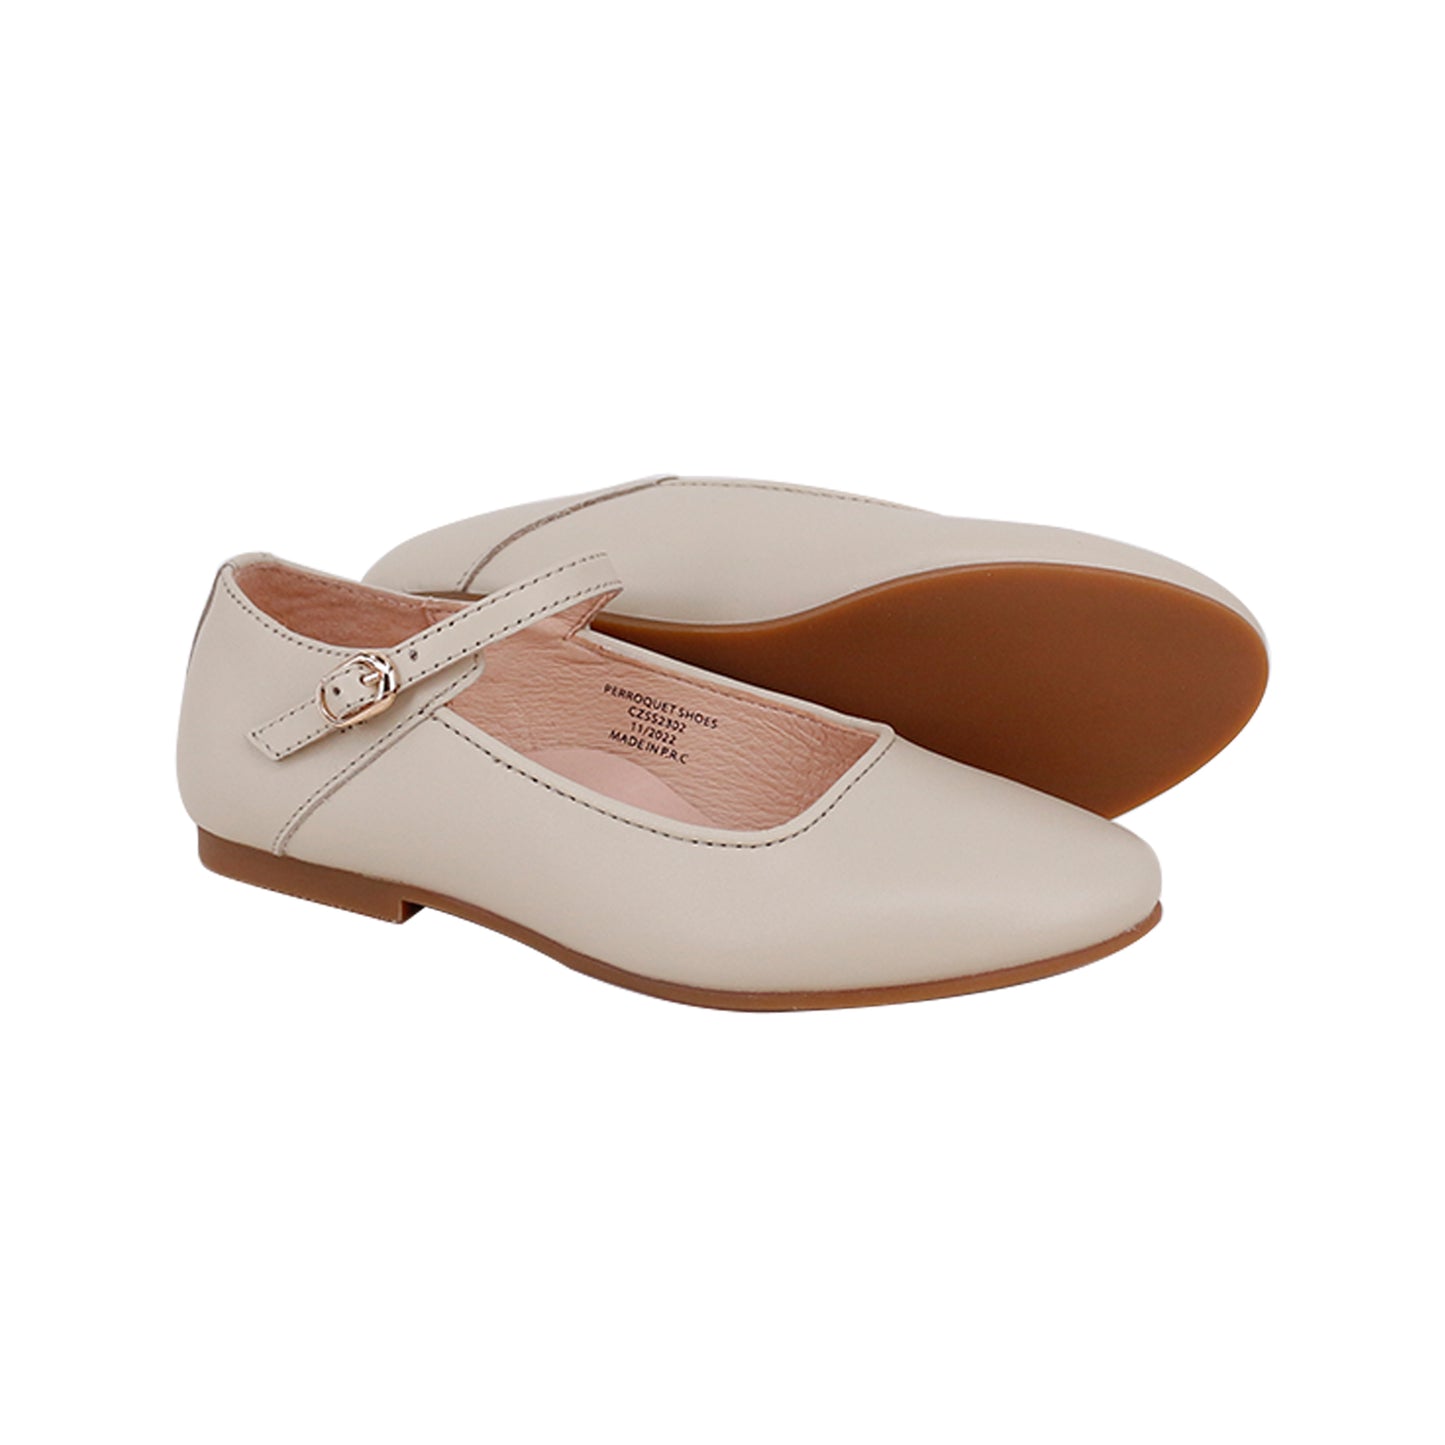 PERROQUET SAND BUCKLE MARY JANE